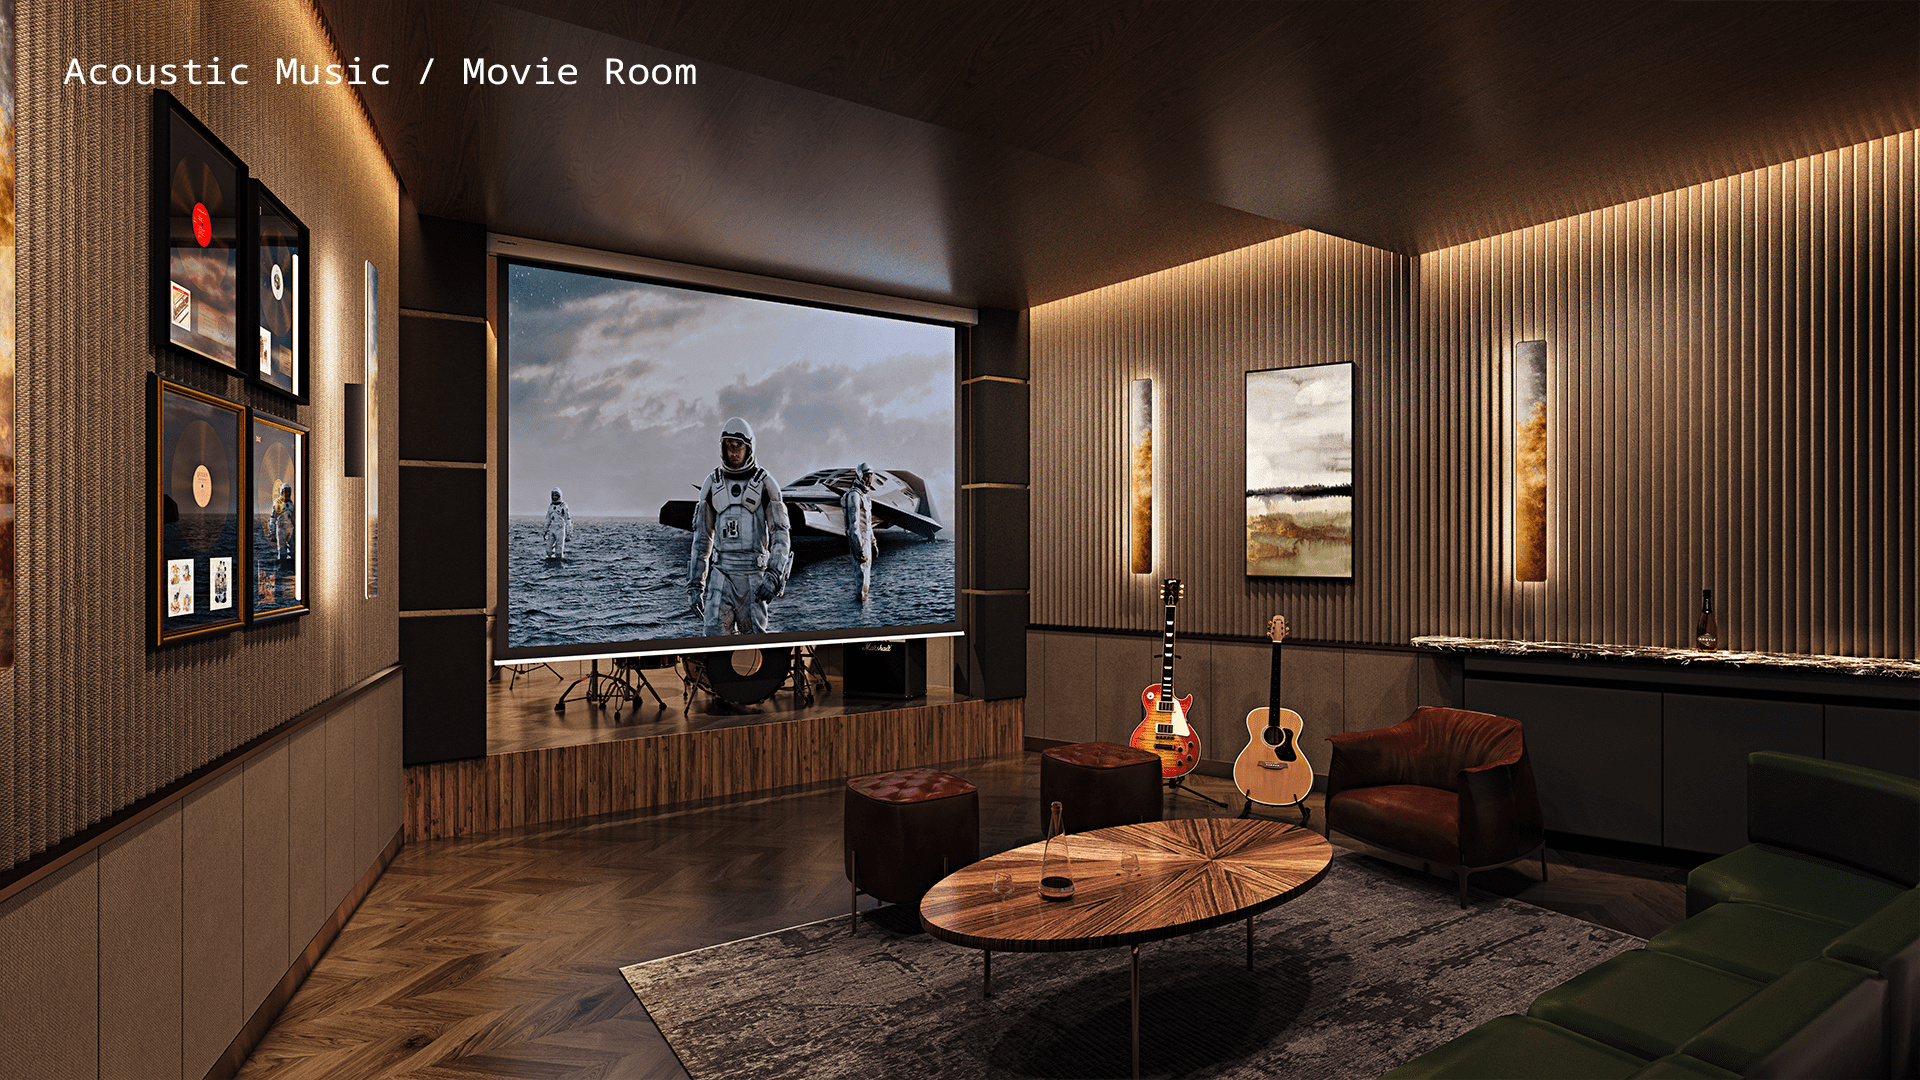 TRM_AM_ACOUSTIC-MUSIC-MOVIE-ROOM